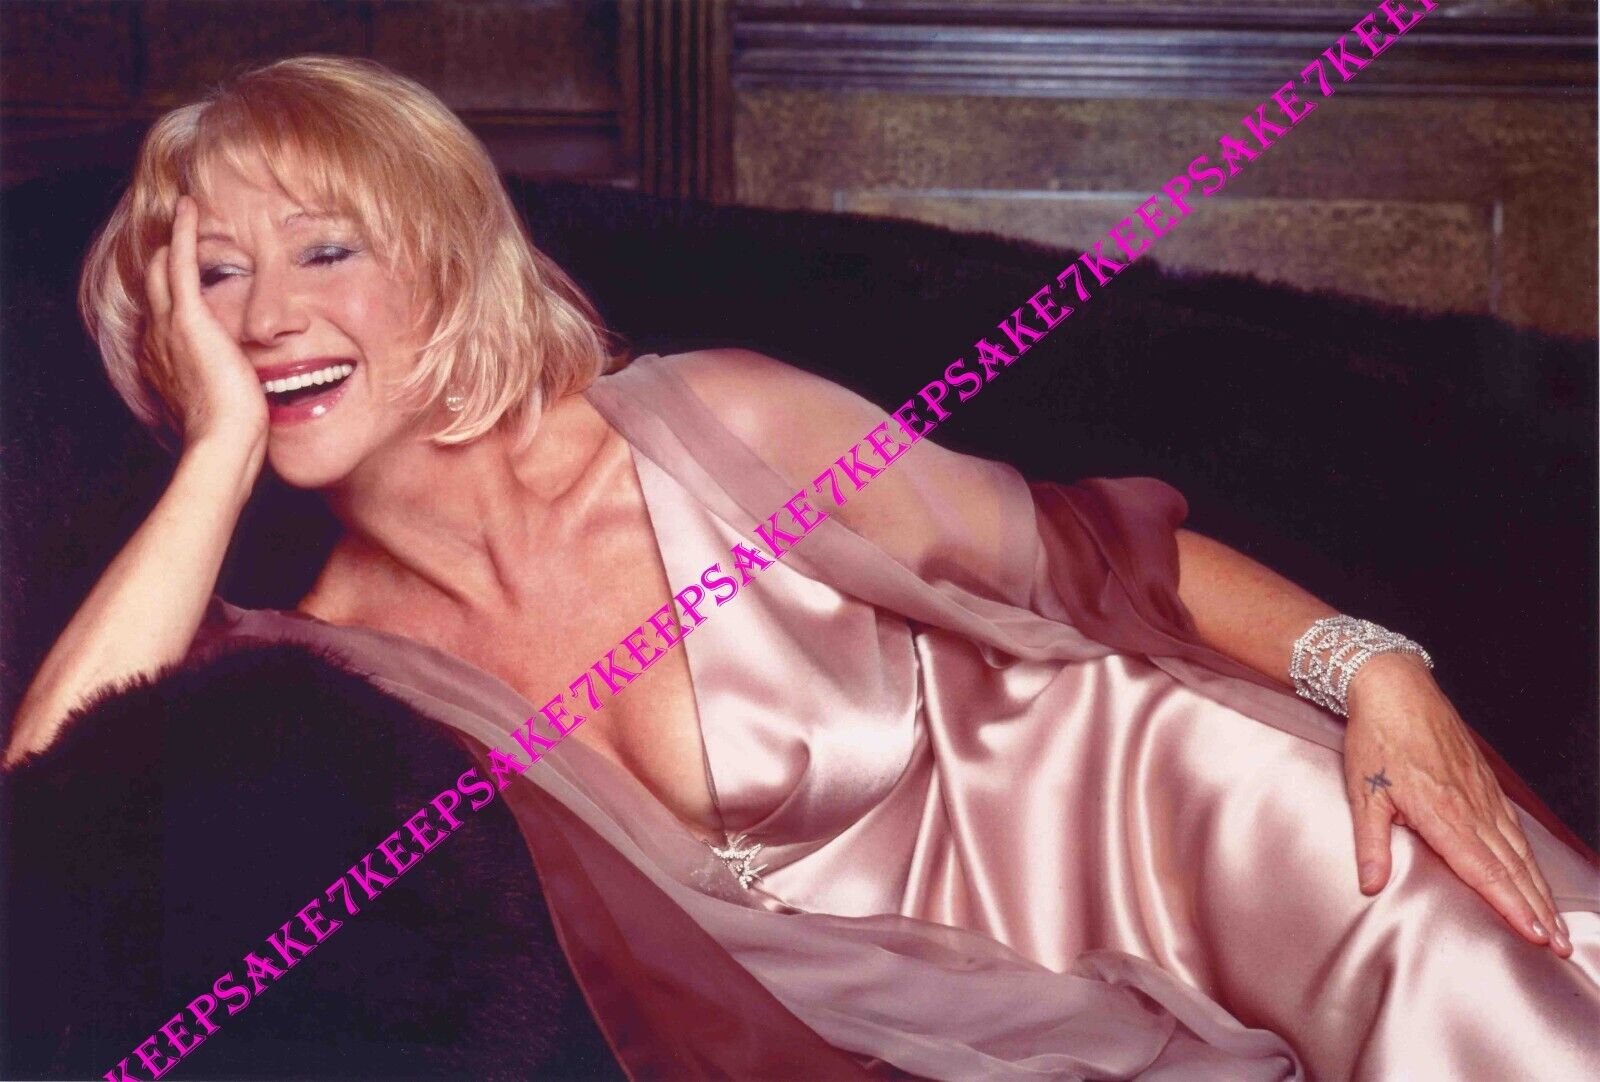 ACTRESS HELEN MIRREN WONDERFULLY EXPOSED IN A SATIN ROBE PHOTO A-HM